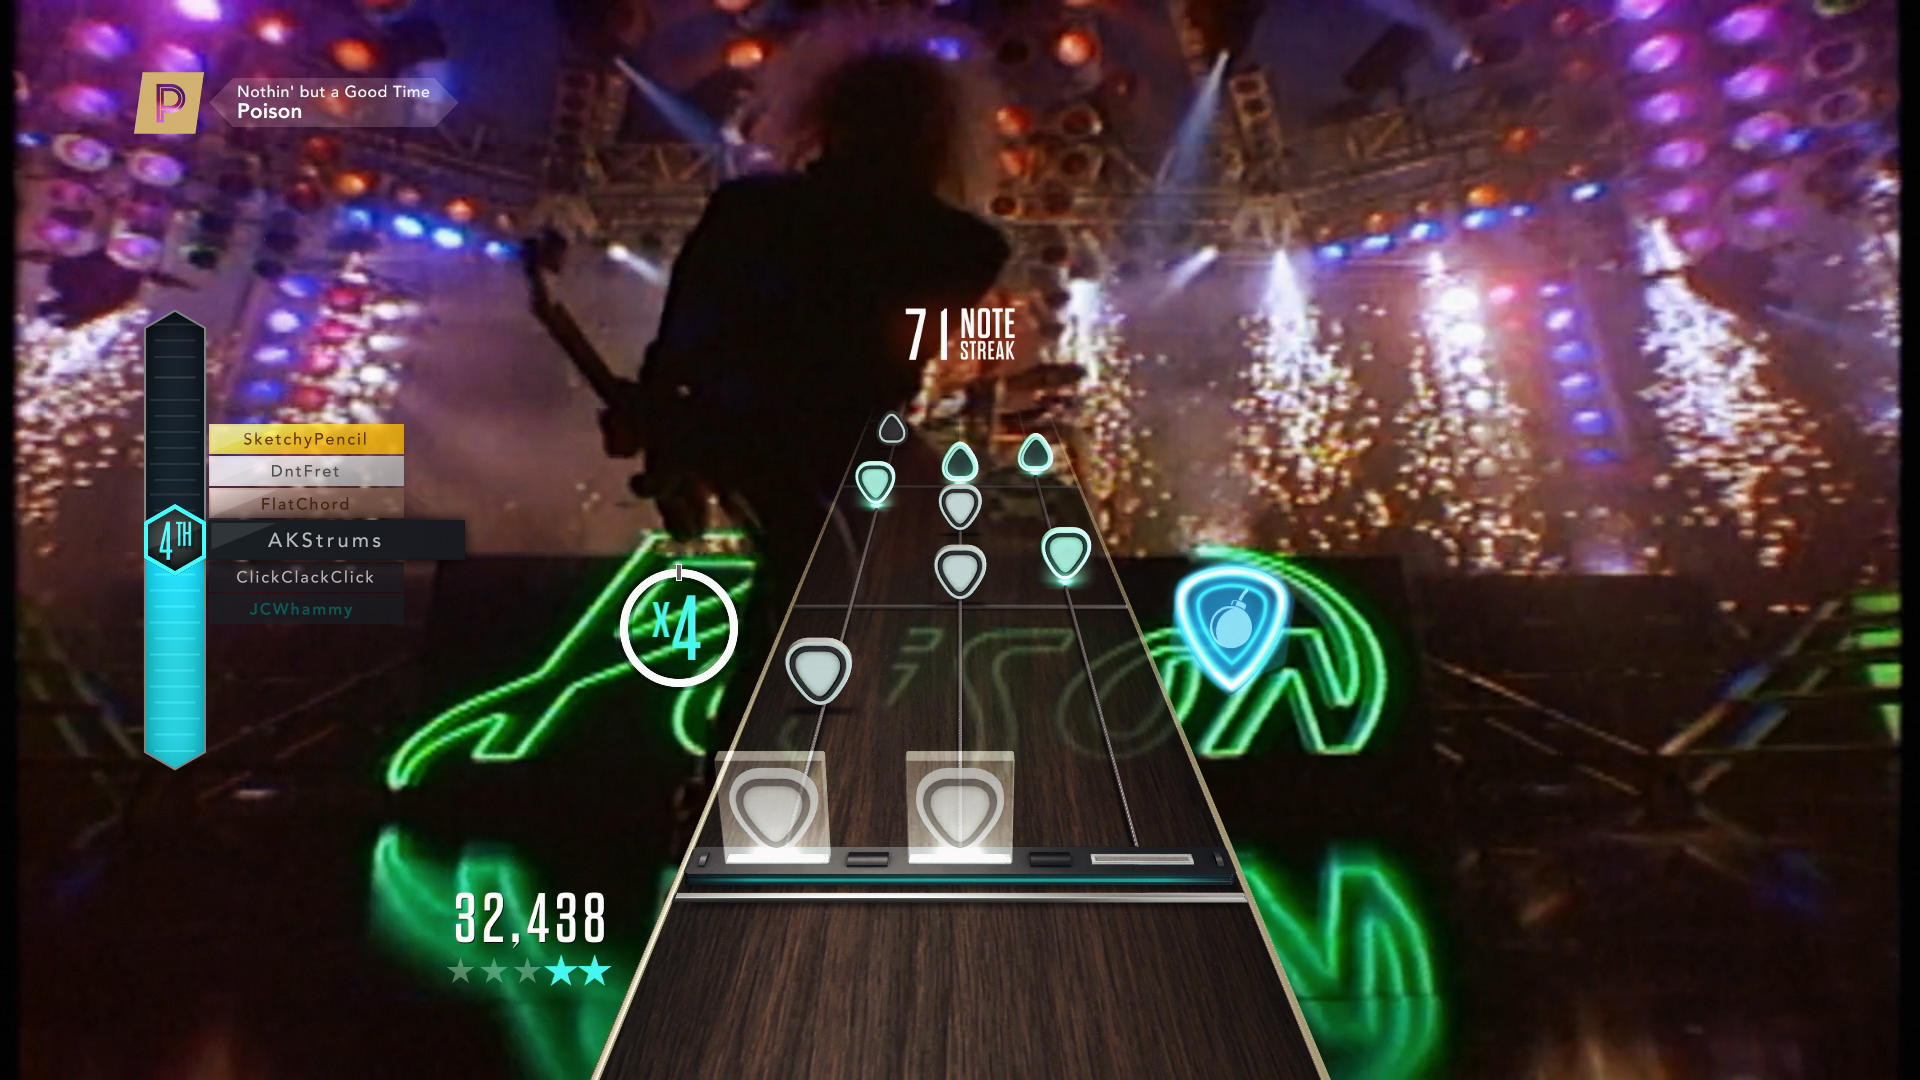 Guitar Hero Live Nothin' But a Good Time